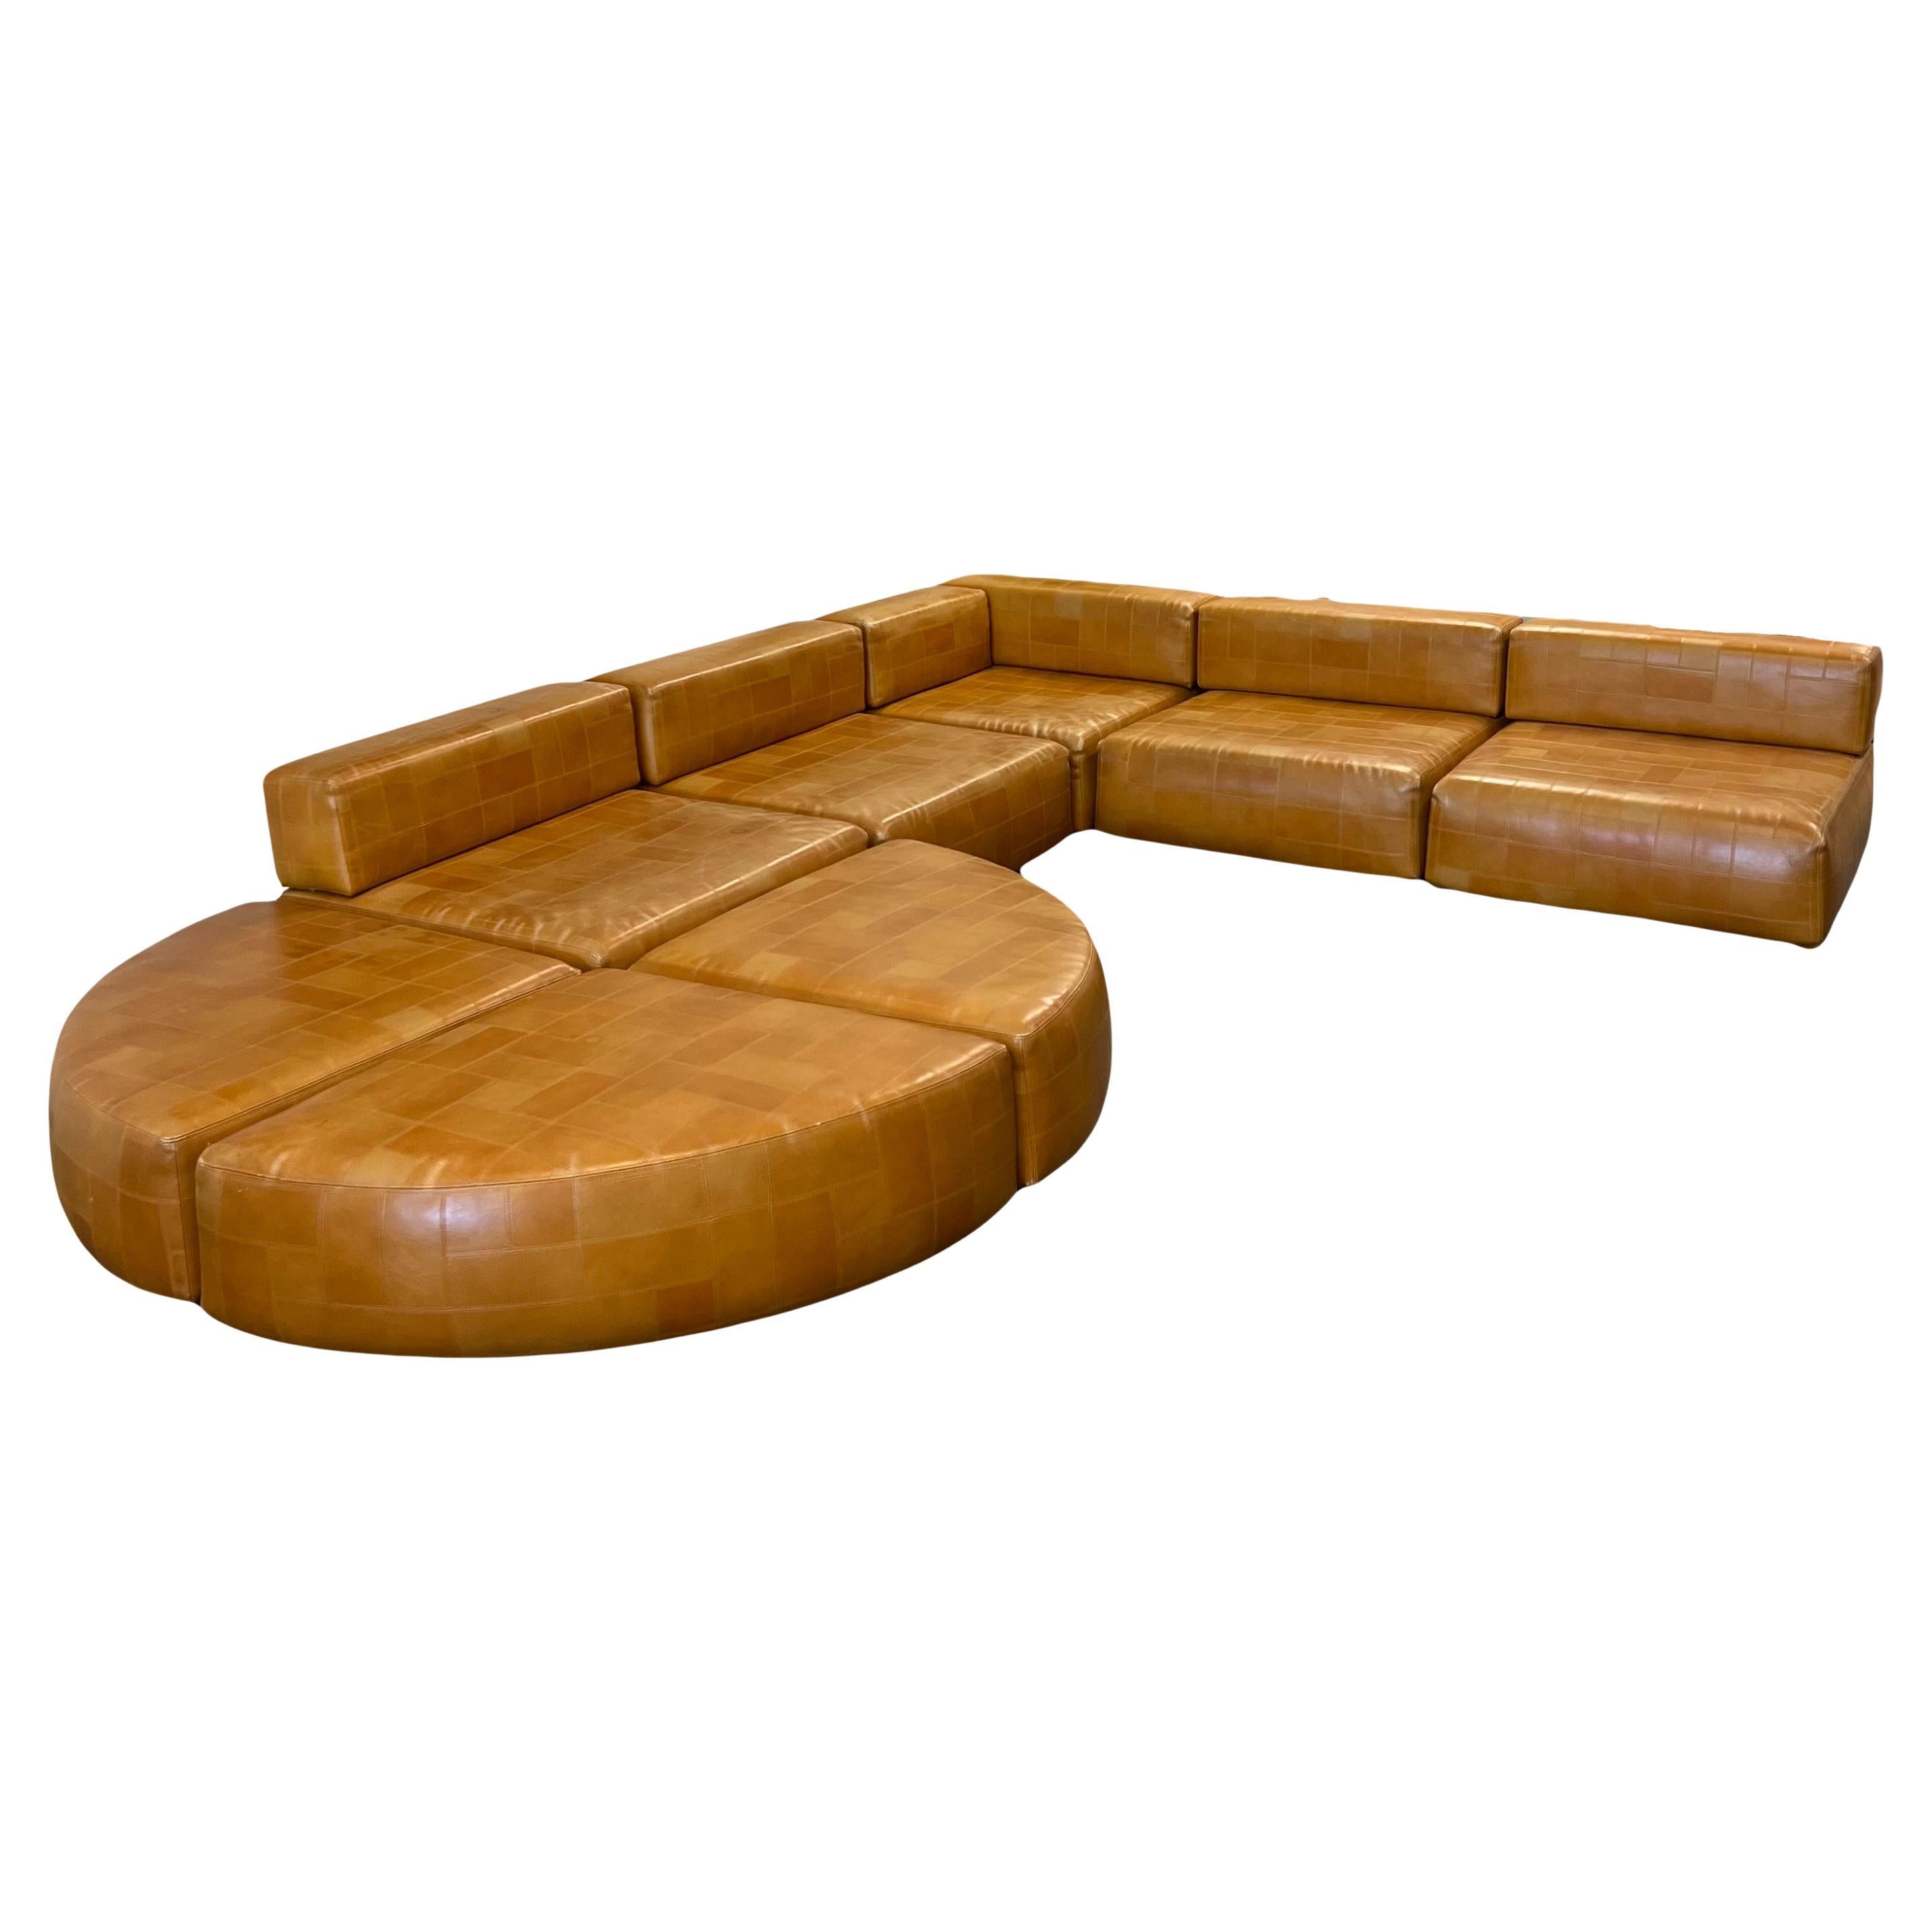 Rare Harvey Probber Patchwork Leather Sectional Sofa For Sale